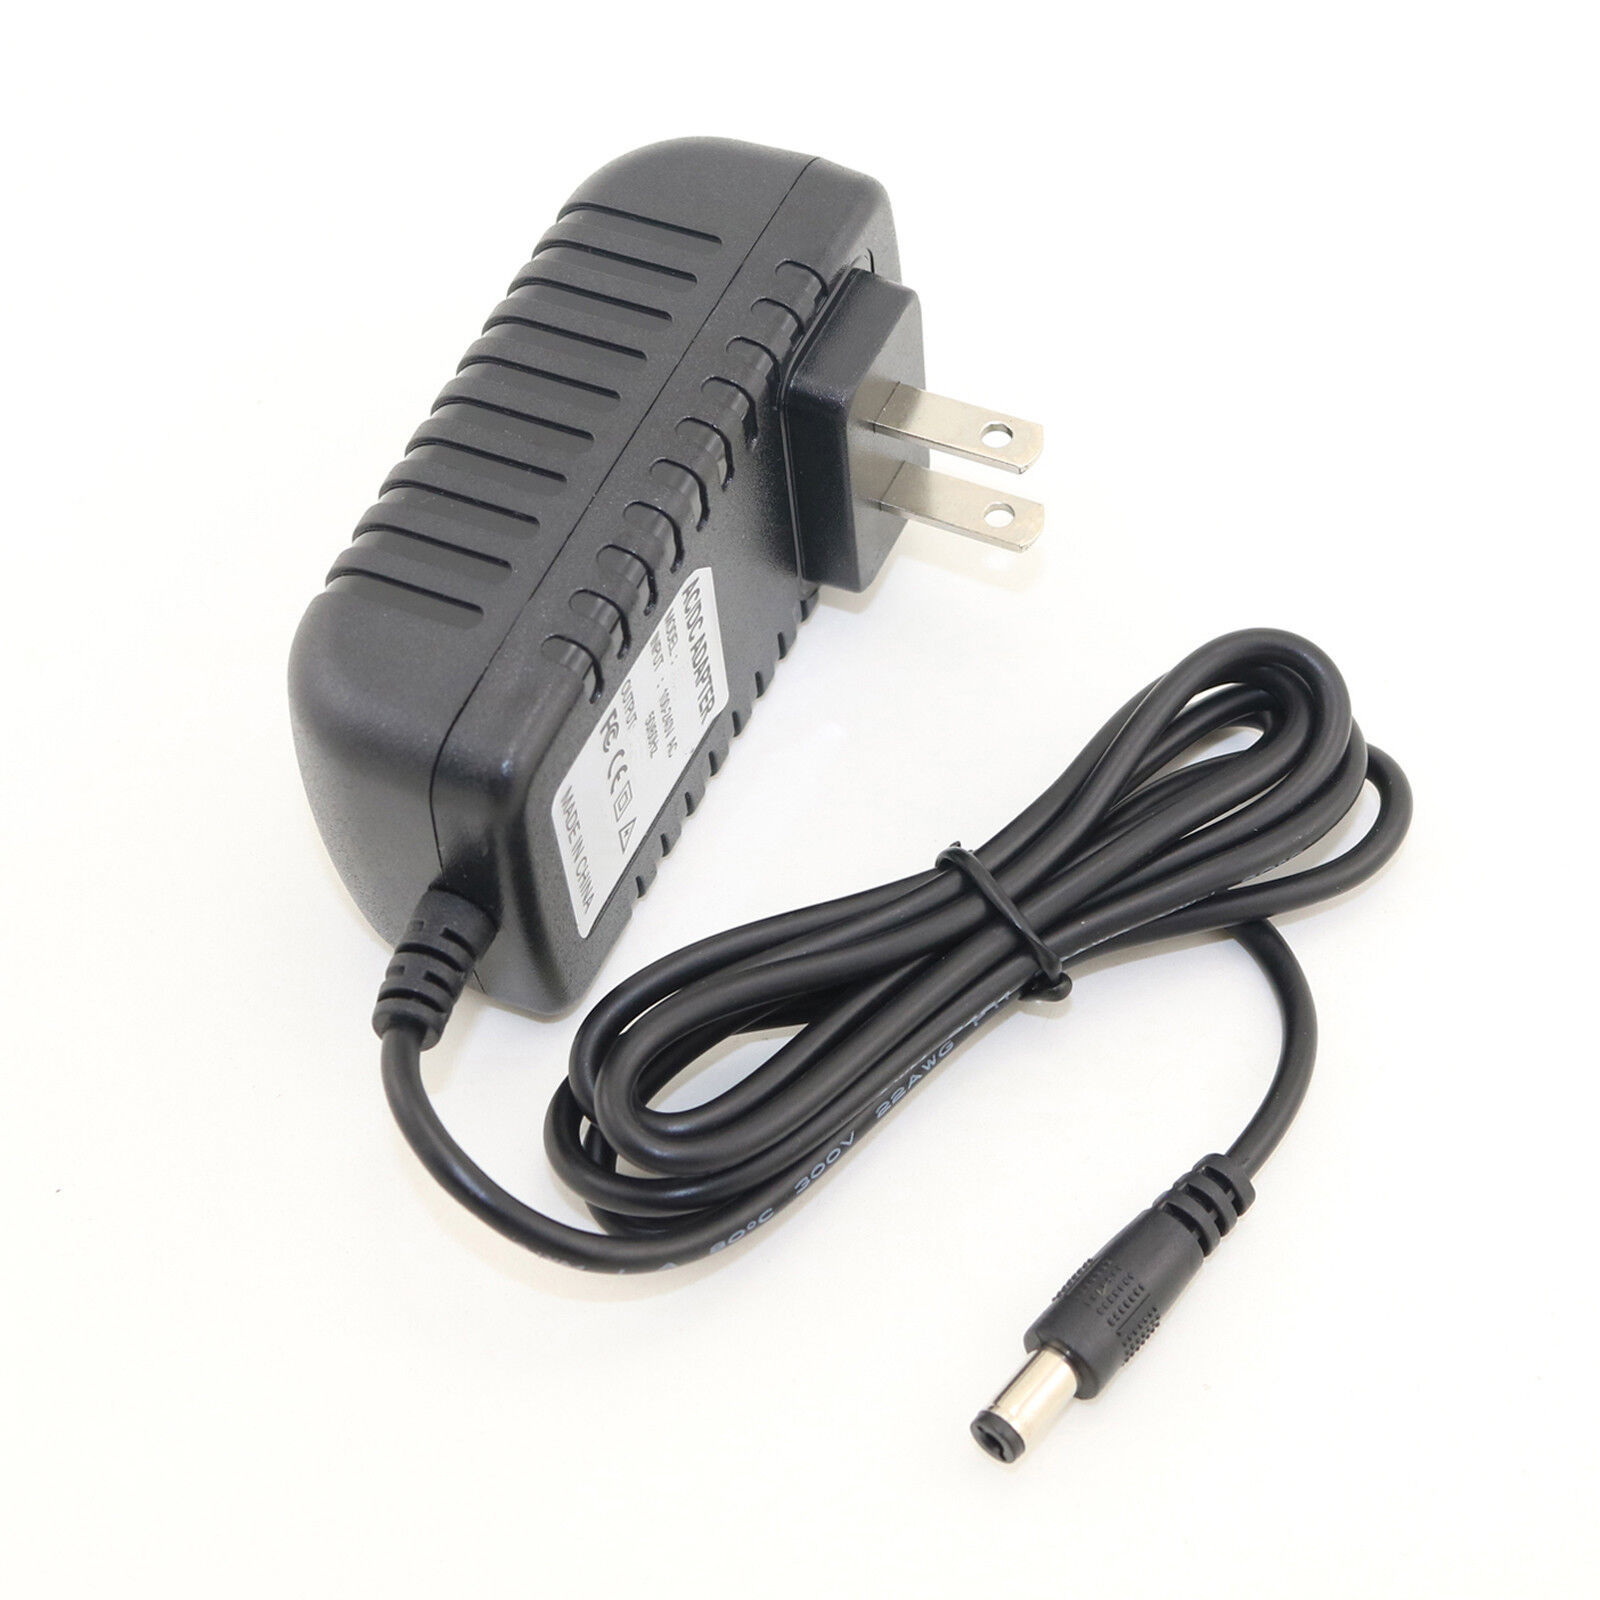 Ac Adapter For Dymo Labelmanager Lm100 Lp250 Lm110 Label Maker Power Supply Cord - $20.89